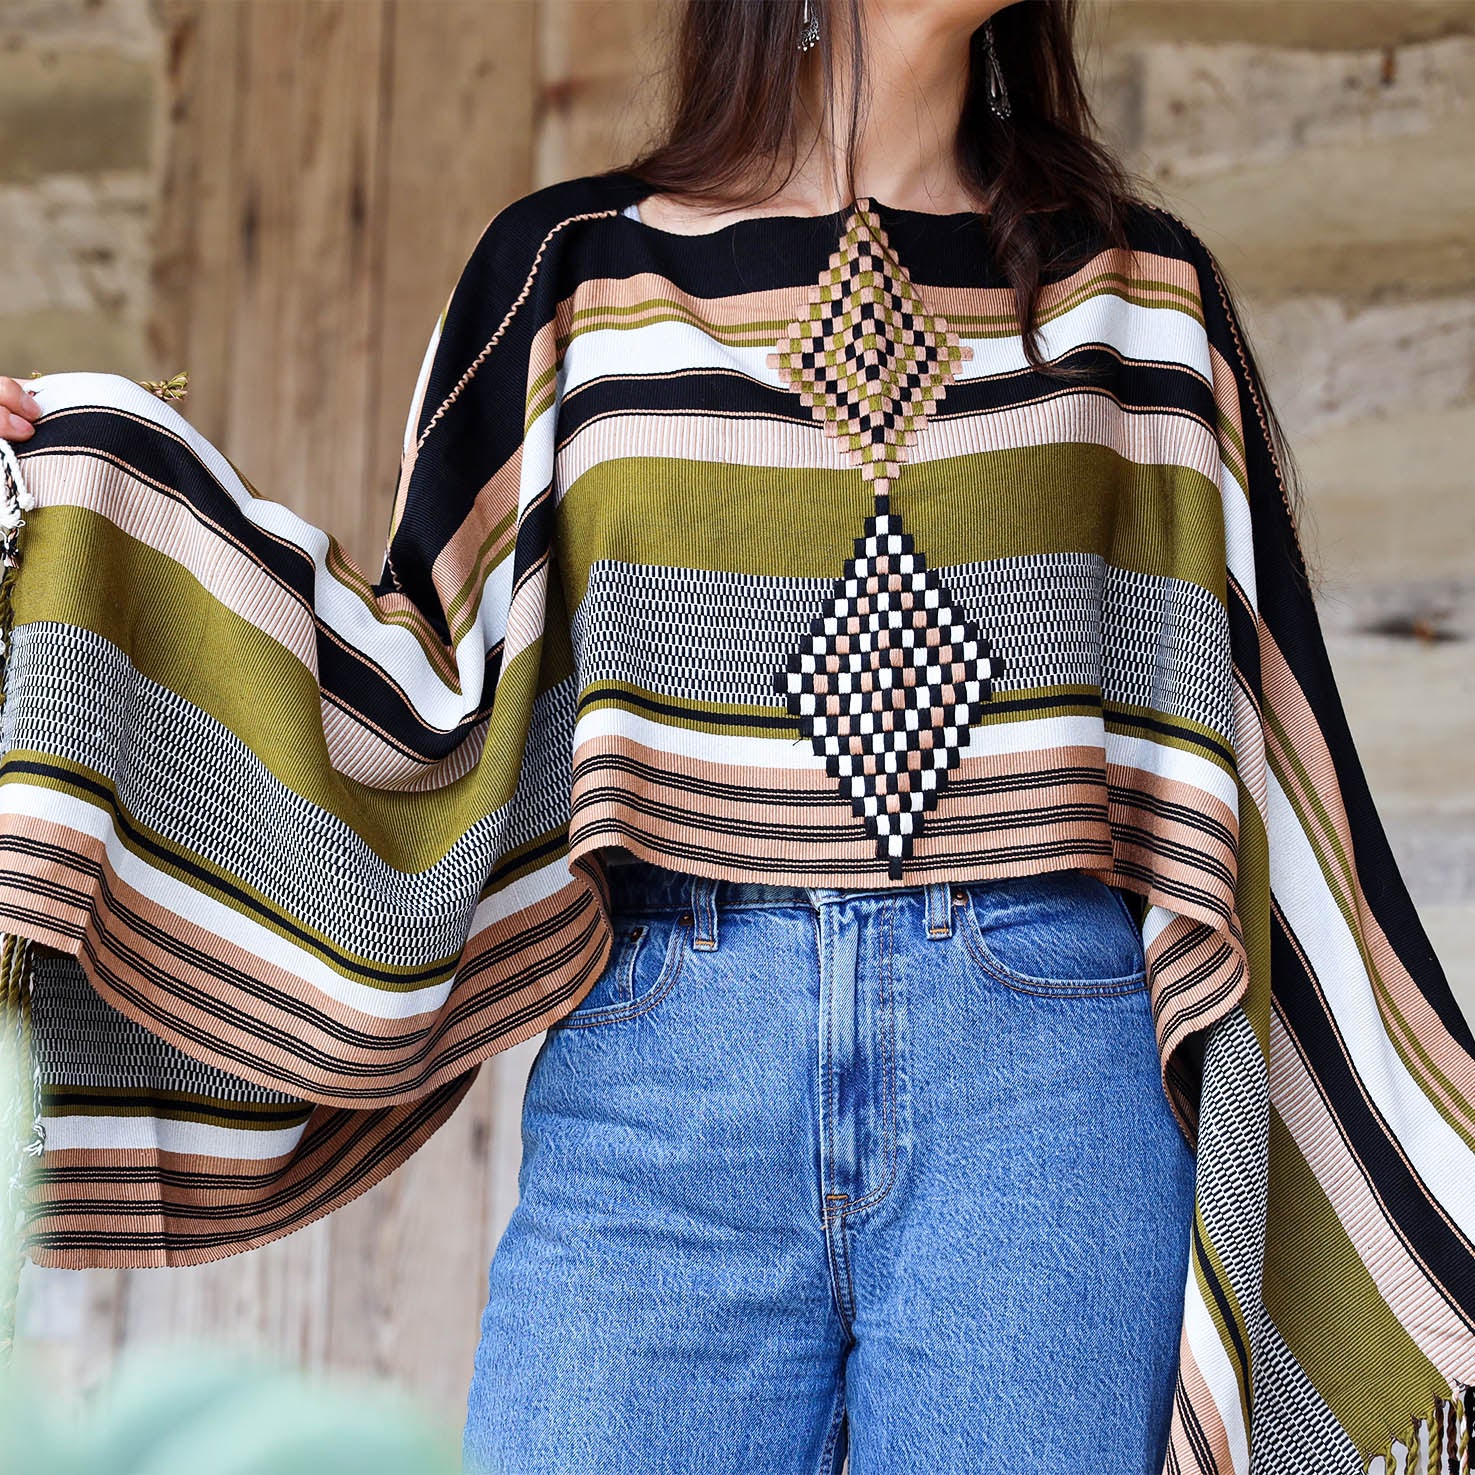 Oxchuc Lines and Rhombus Poncho